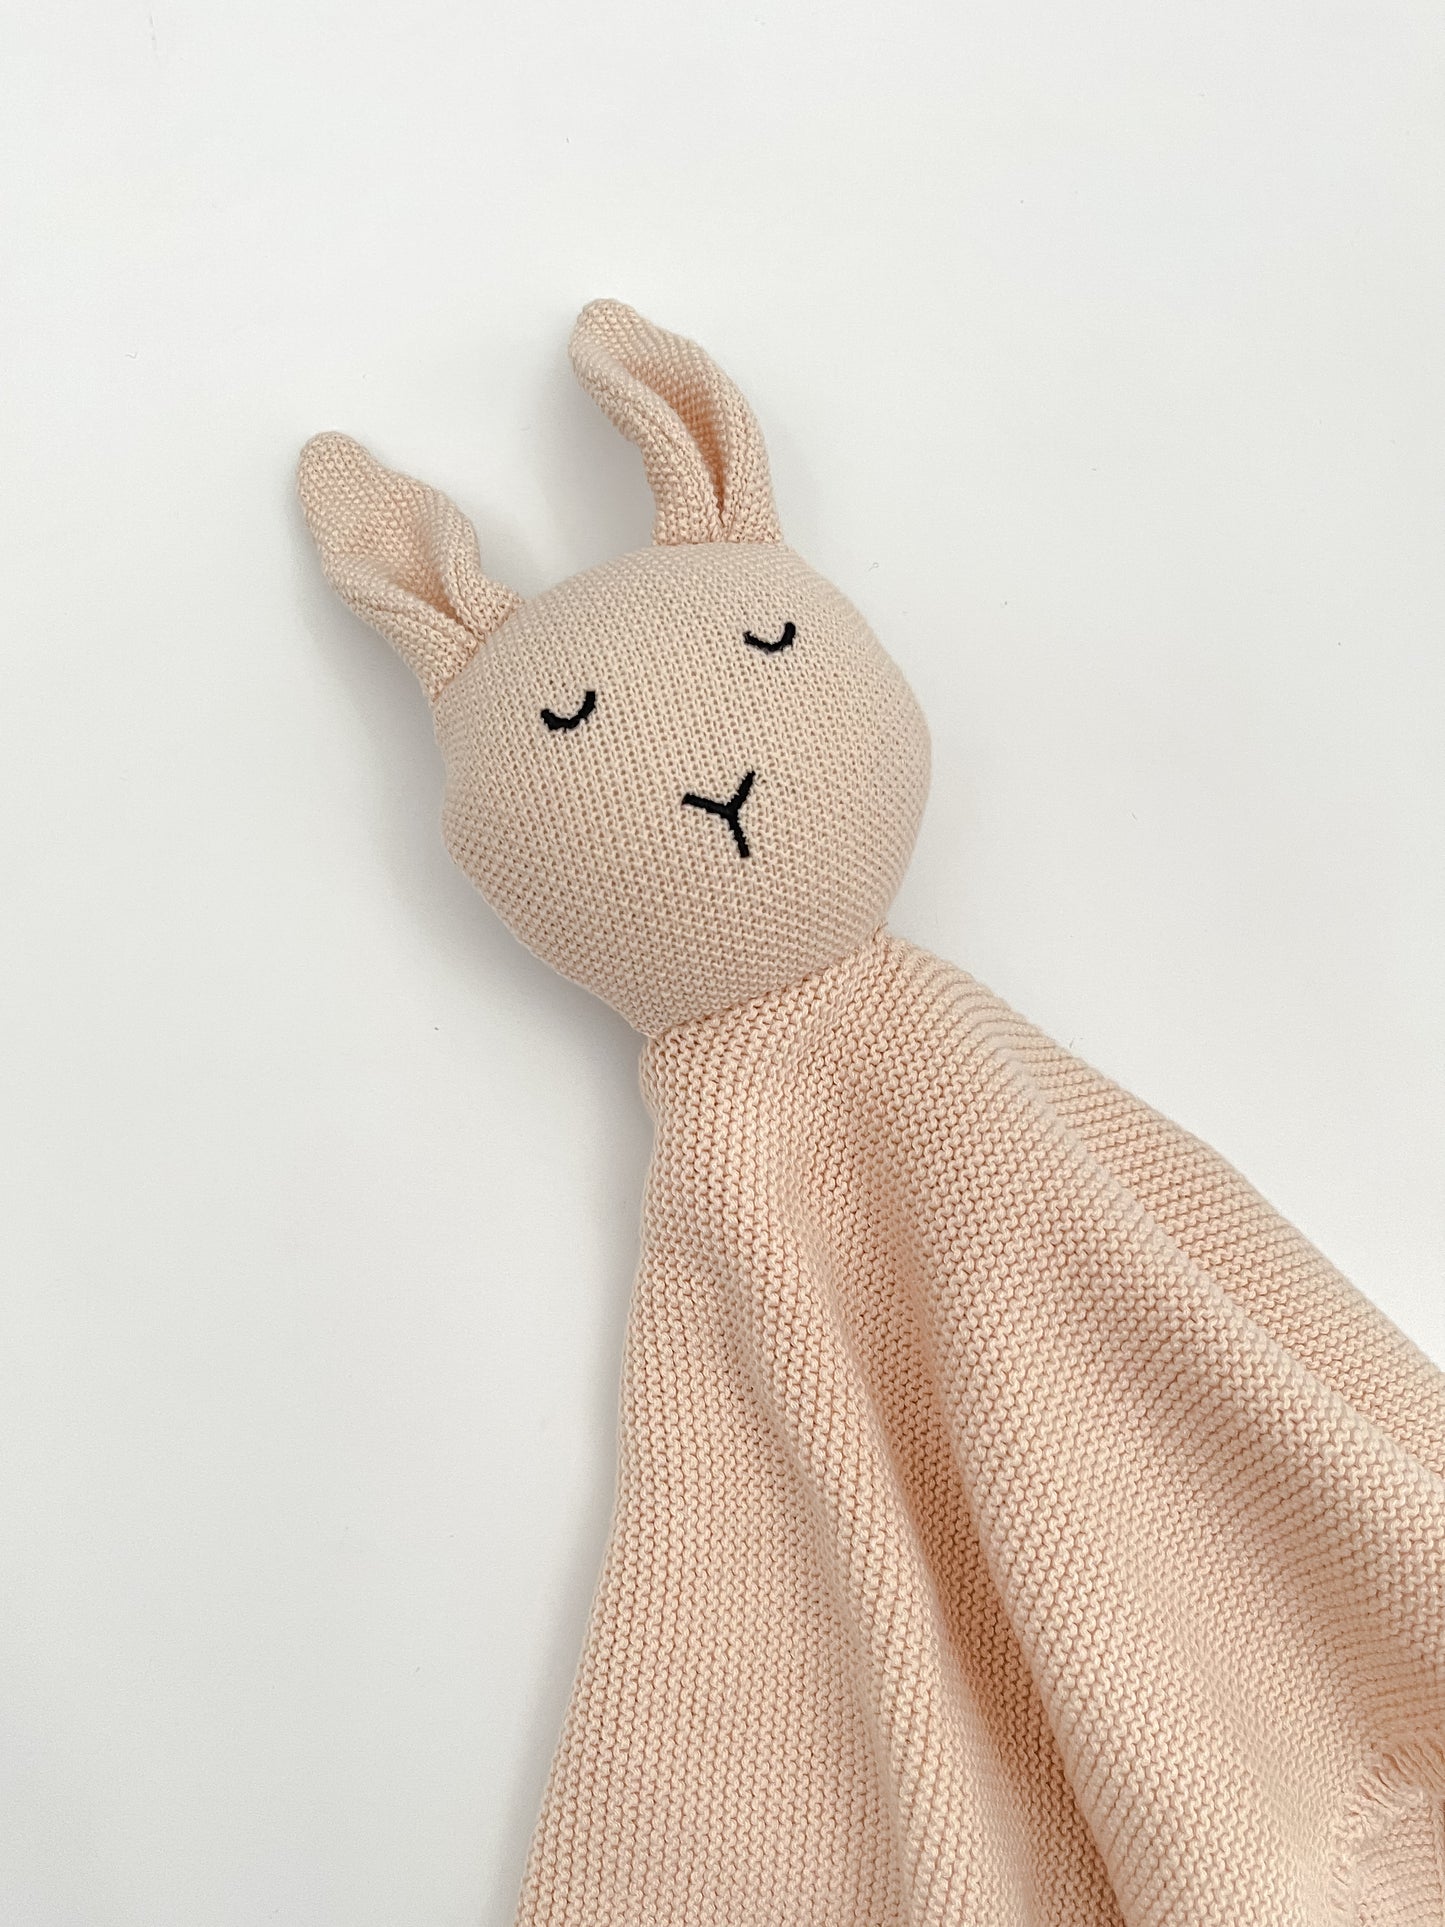 Tan Knitted Bunny Lovey